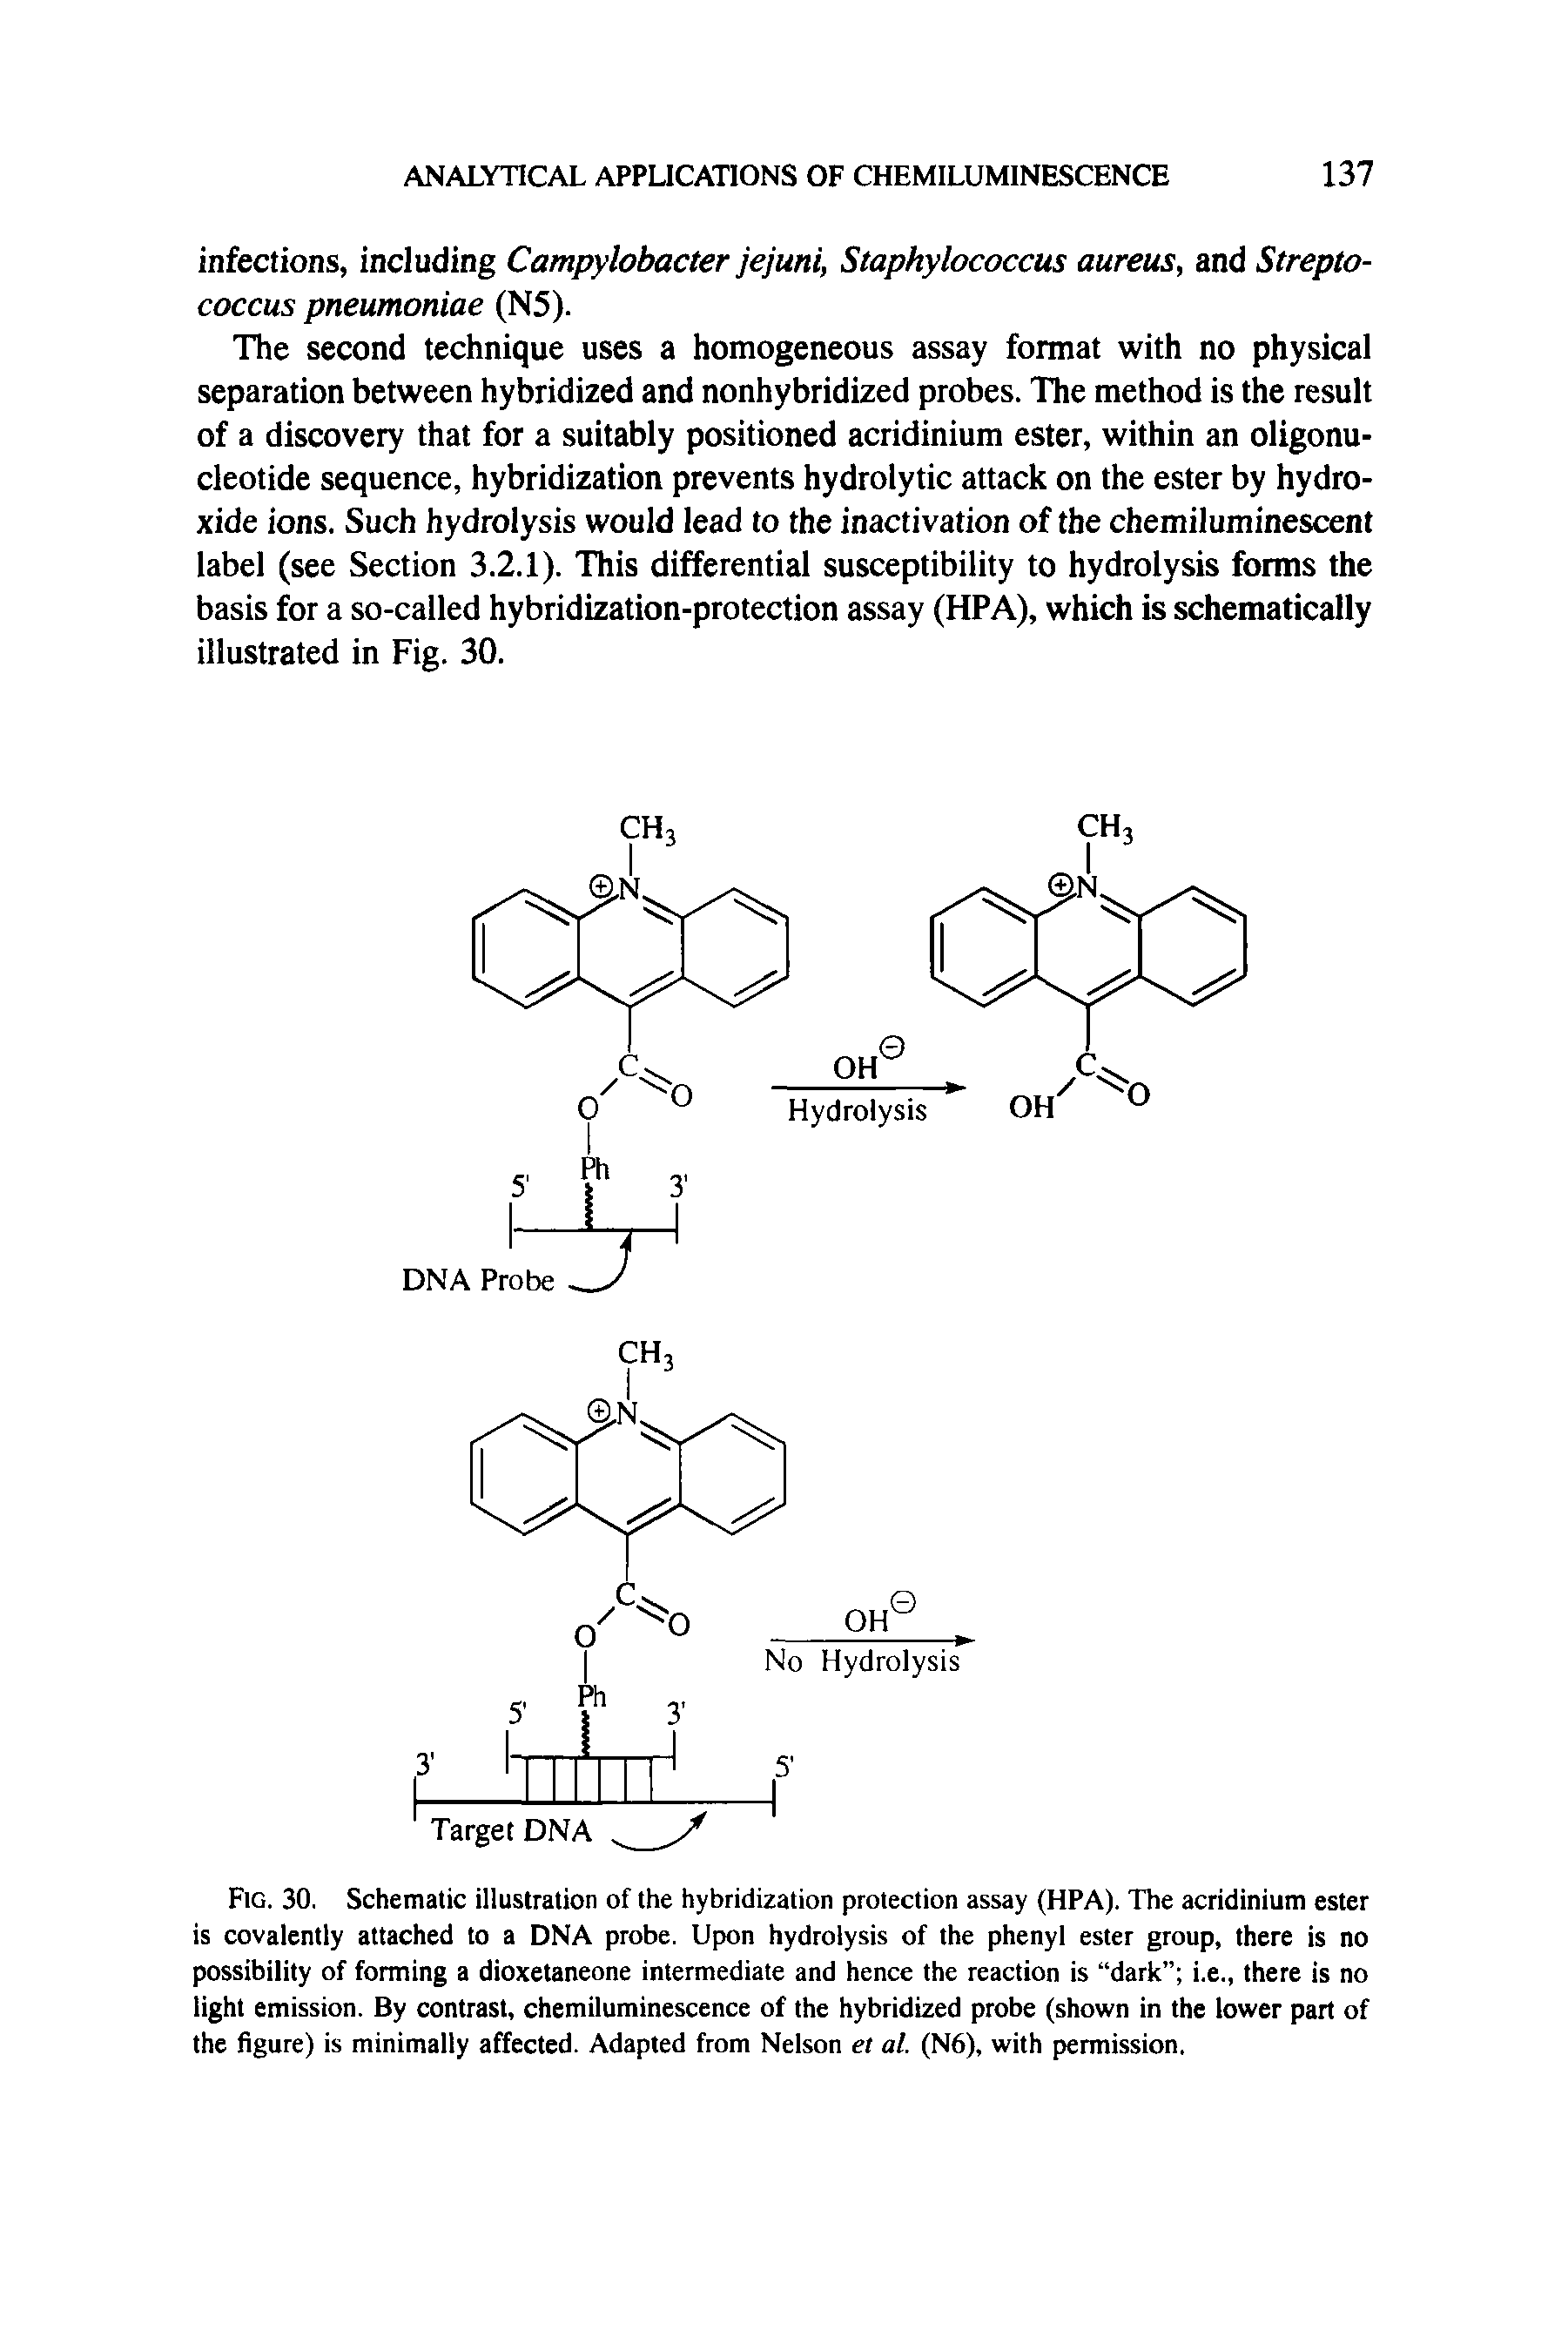 Fig. 30. Schematic illustration of the hybridization protection assay (HPA). The acridinium ester is covalently attached to a DNA probe. Upon hydrolysis of the phenyl ester group, there is no possibility of forming a dioxetaneone intermediate and hence the reaction is dark i.e., there is no light emission. By contrast, chemiluminescence of the hybridized probe (shown in the lower part of the figure) is minimally affected. Adapted from Nelson et at. (N6), with permission.